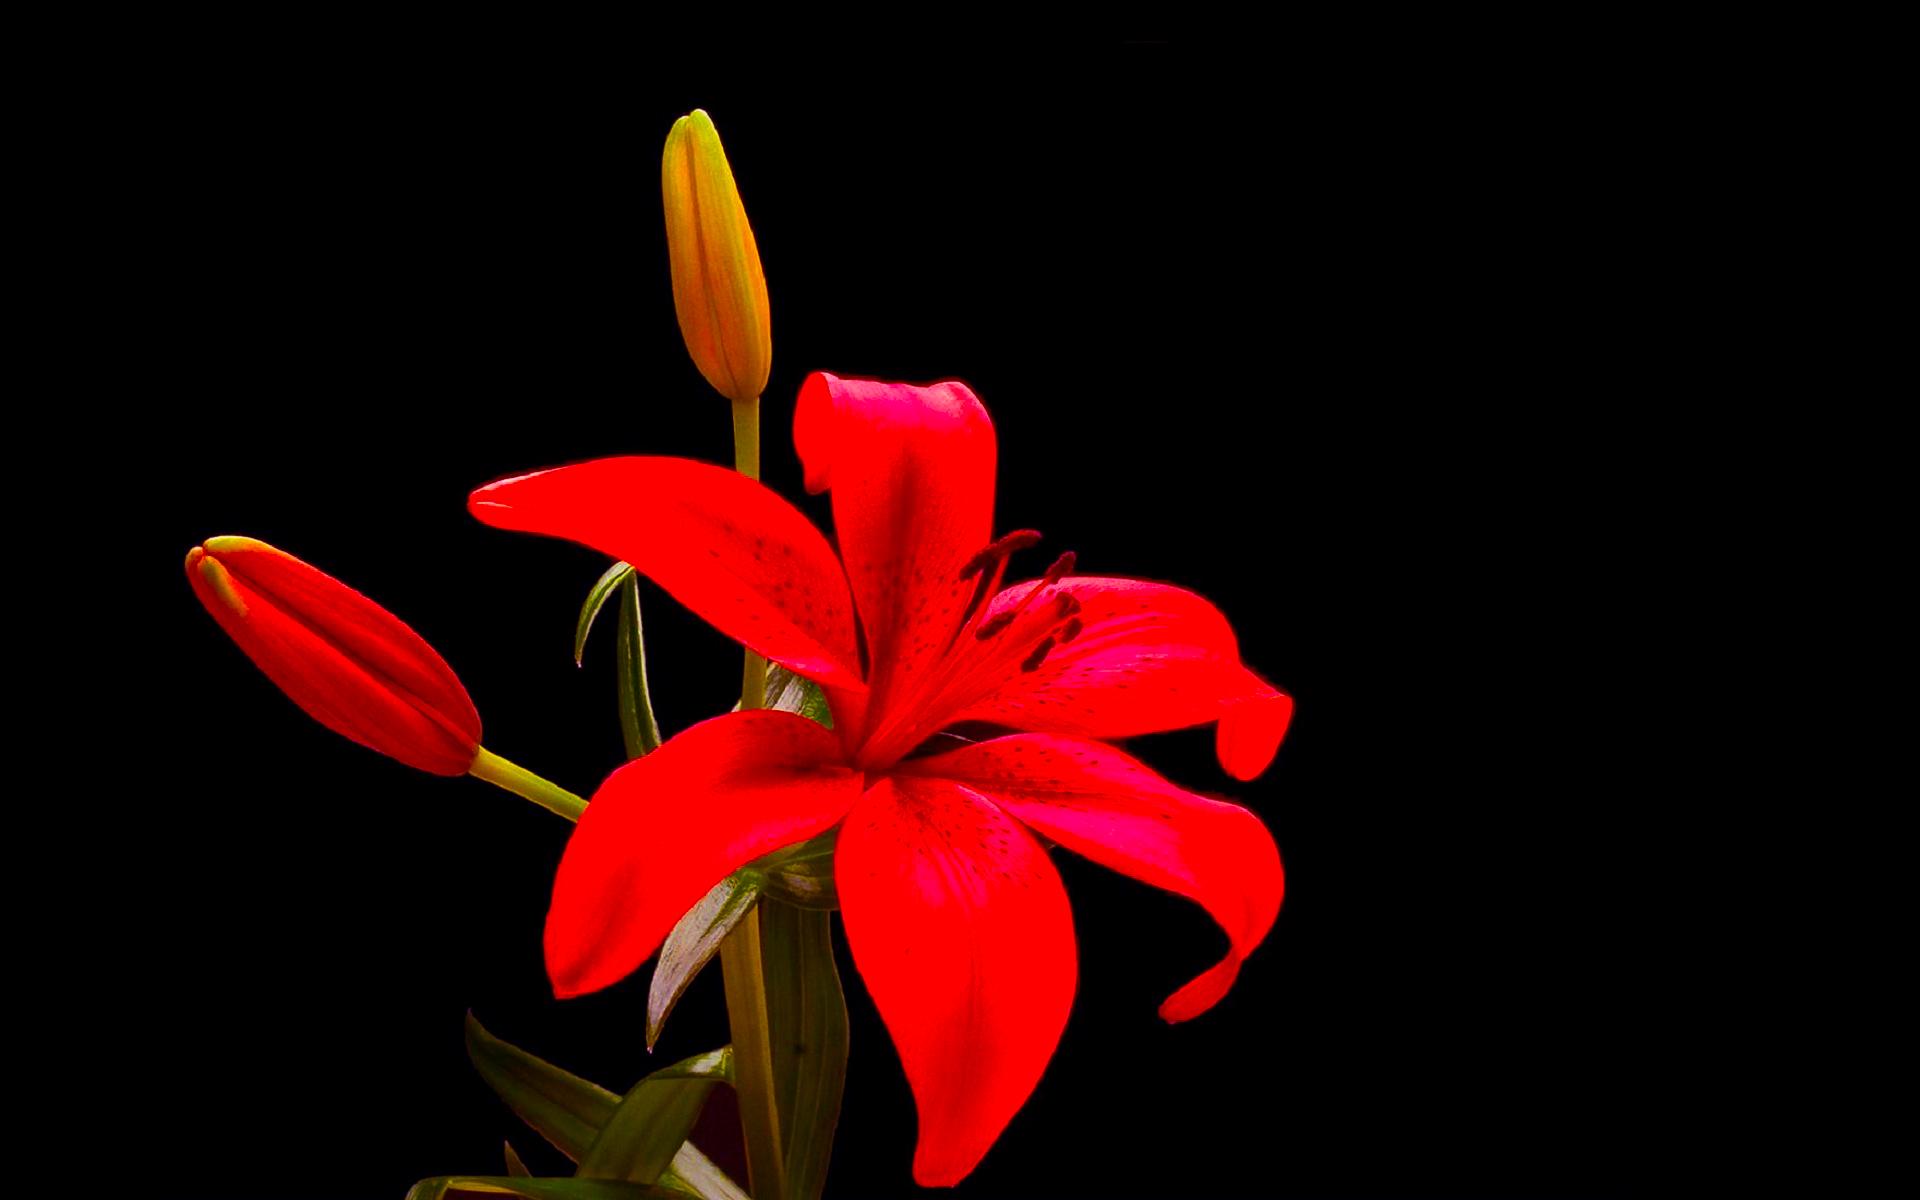 Red flowers beautiful background image - New hd wallpaperNew hd ...